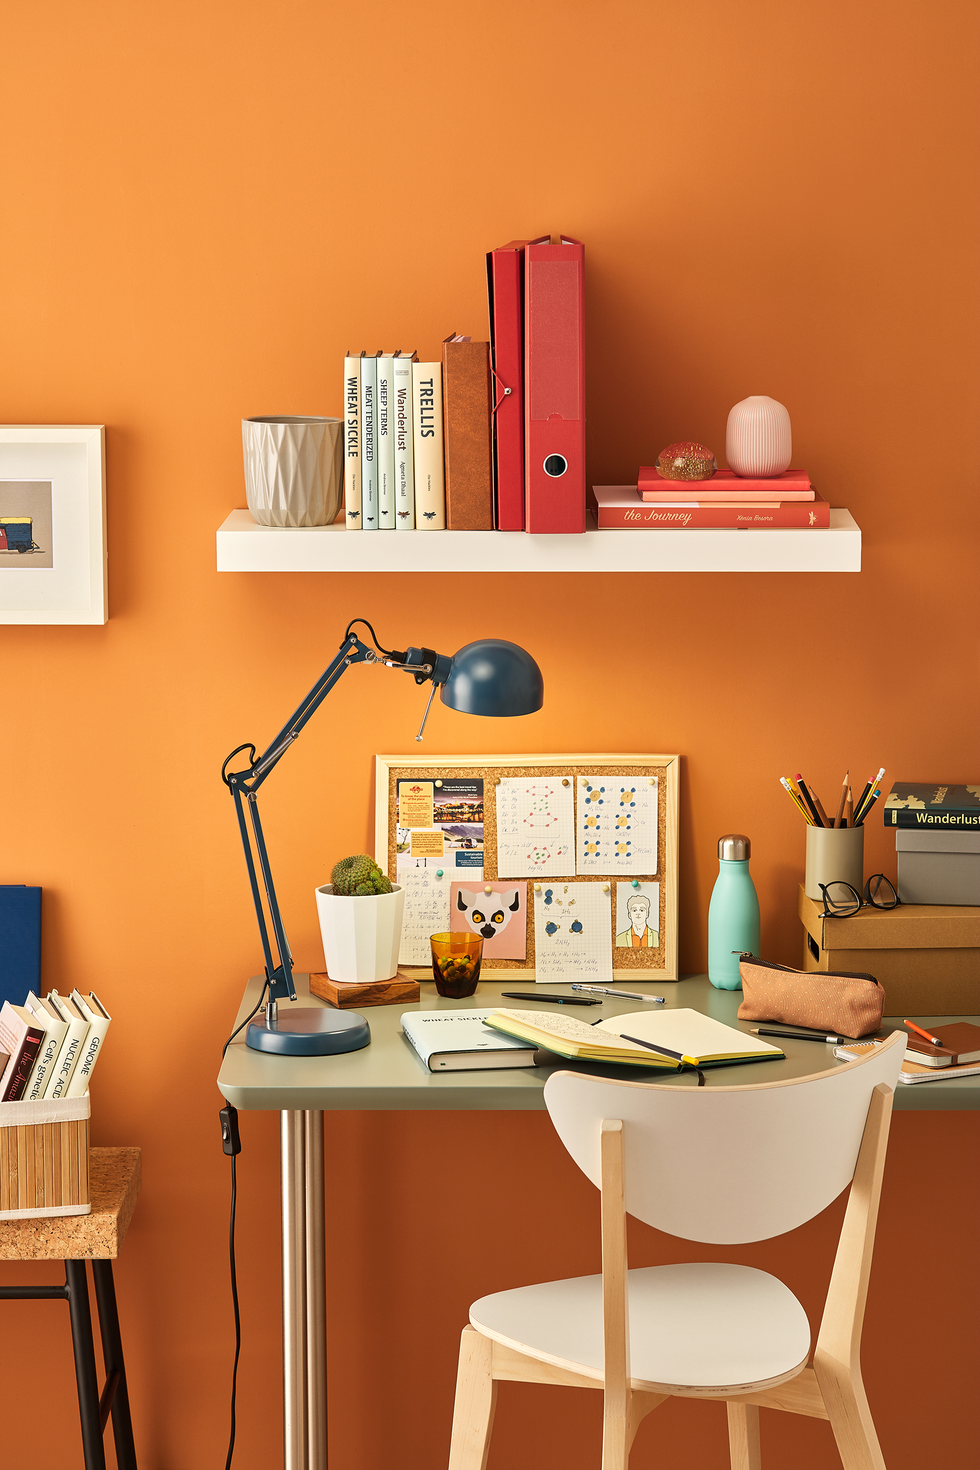 student with desk, chair and shelf messy table with notebooks, stationery, lamp and pinboard bright orange wall